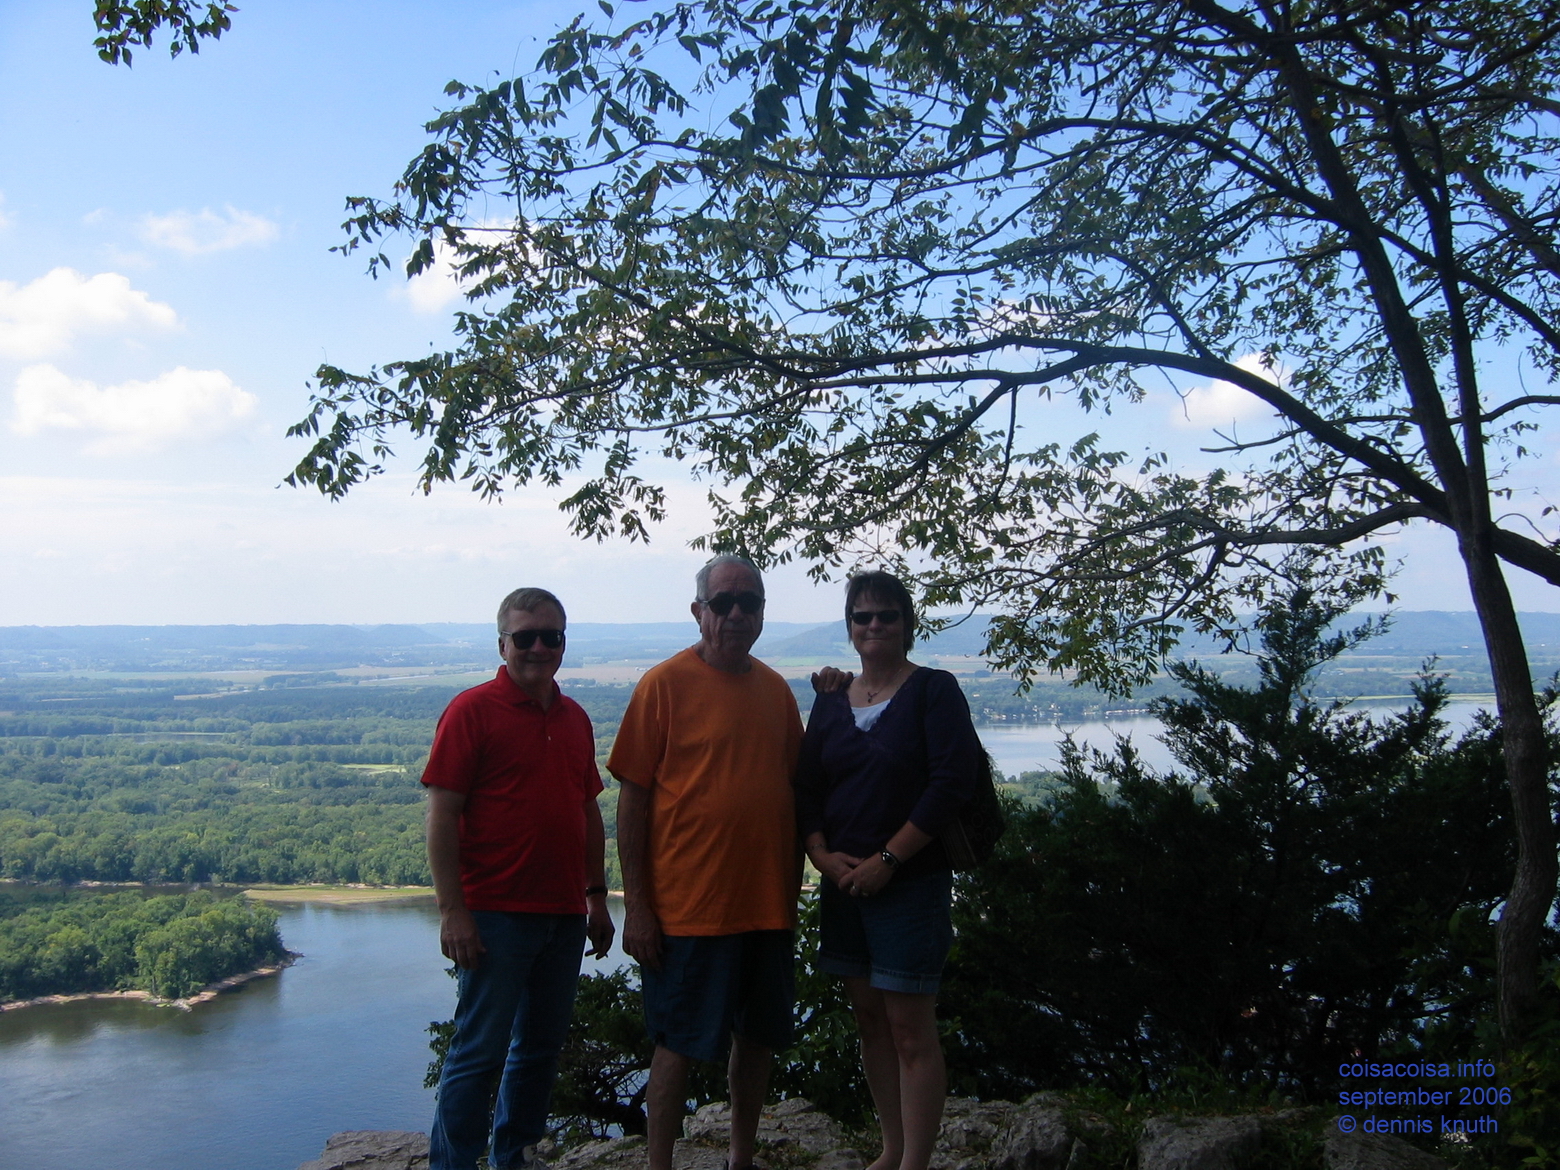 Sherri, Dennis Knuth and Muscio on the Mississippi River